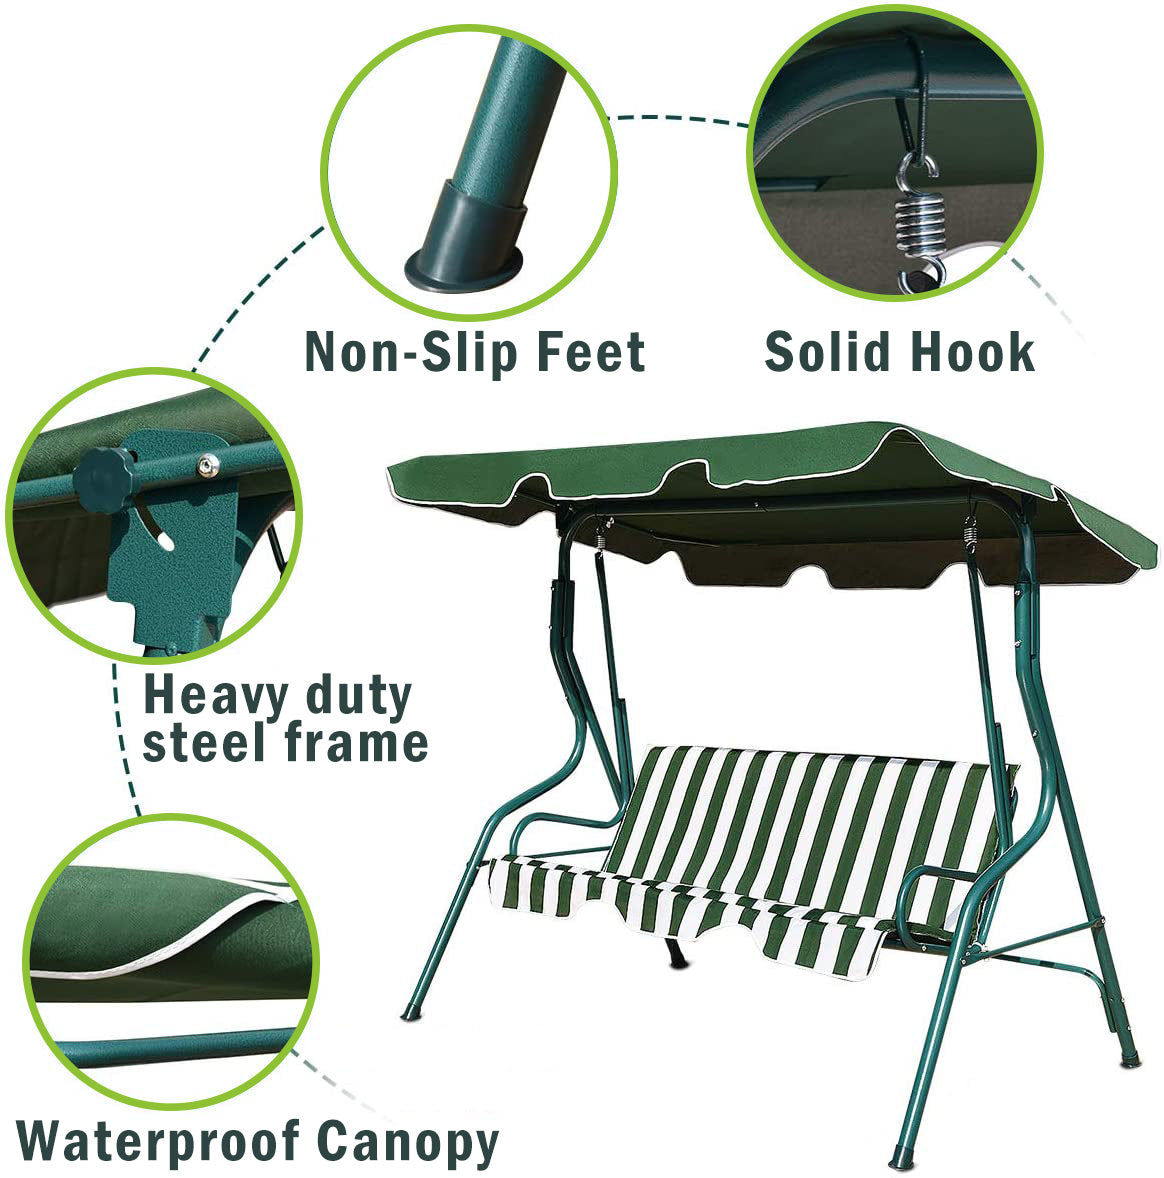 3-Person Outdoor Patio Swing Chair with Removable Cushion and Coated Steel Frame